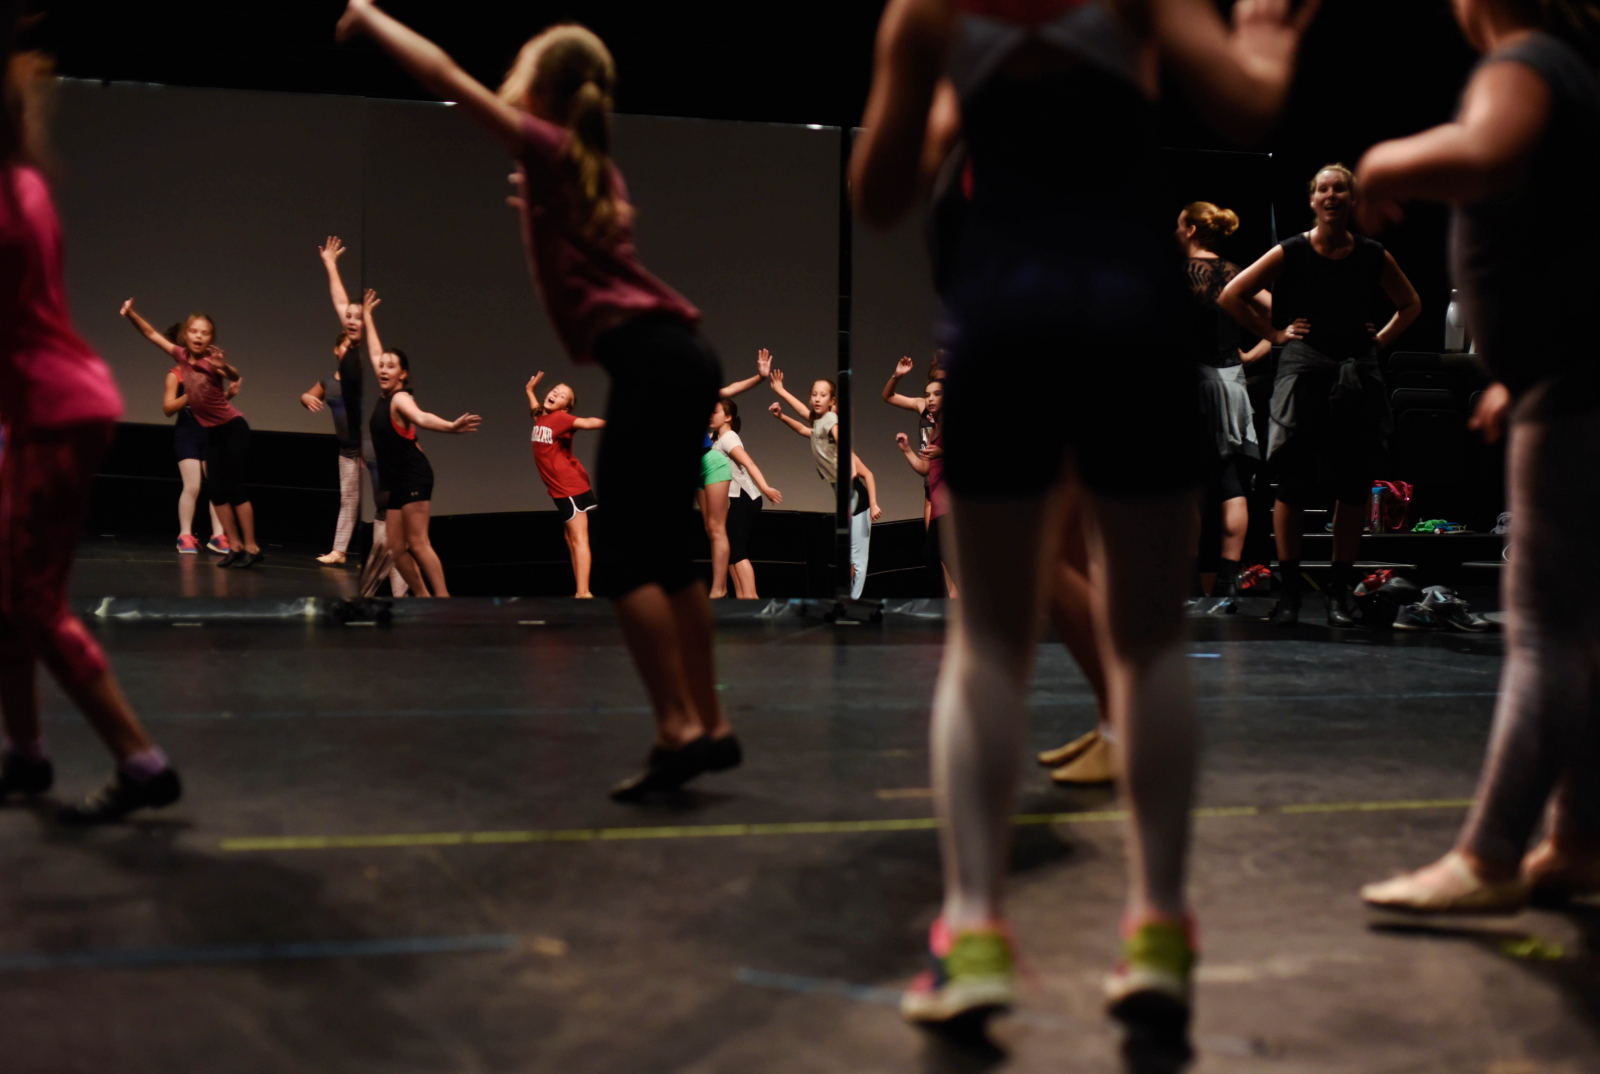 Students from the Broadway Dance Summer Education Program learn choreography in the GE Theatre at Proctors Tuesday, July 25, 2017.